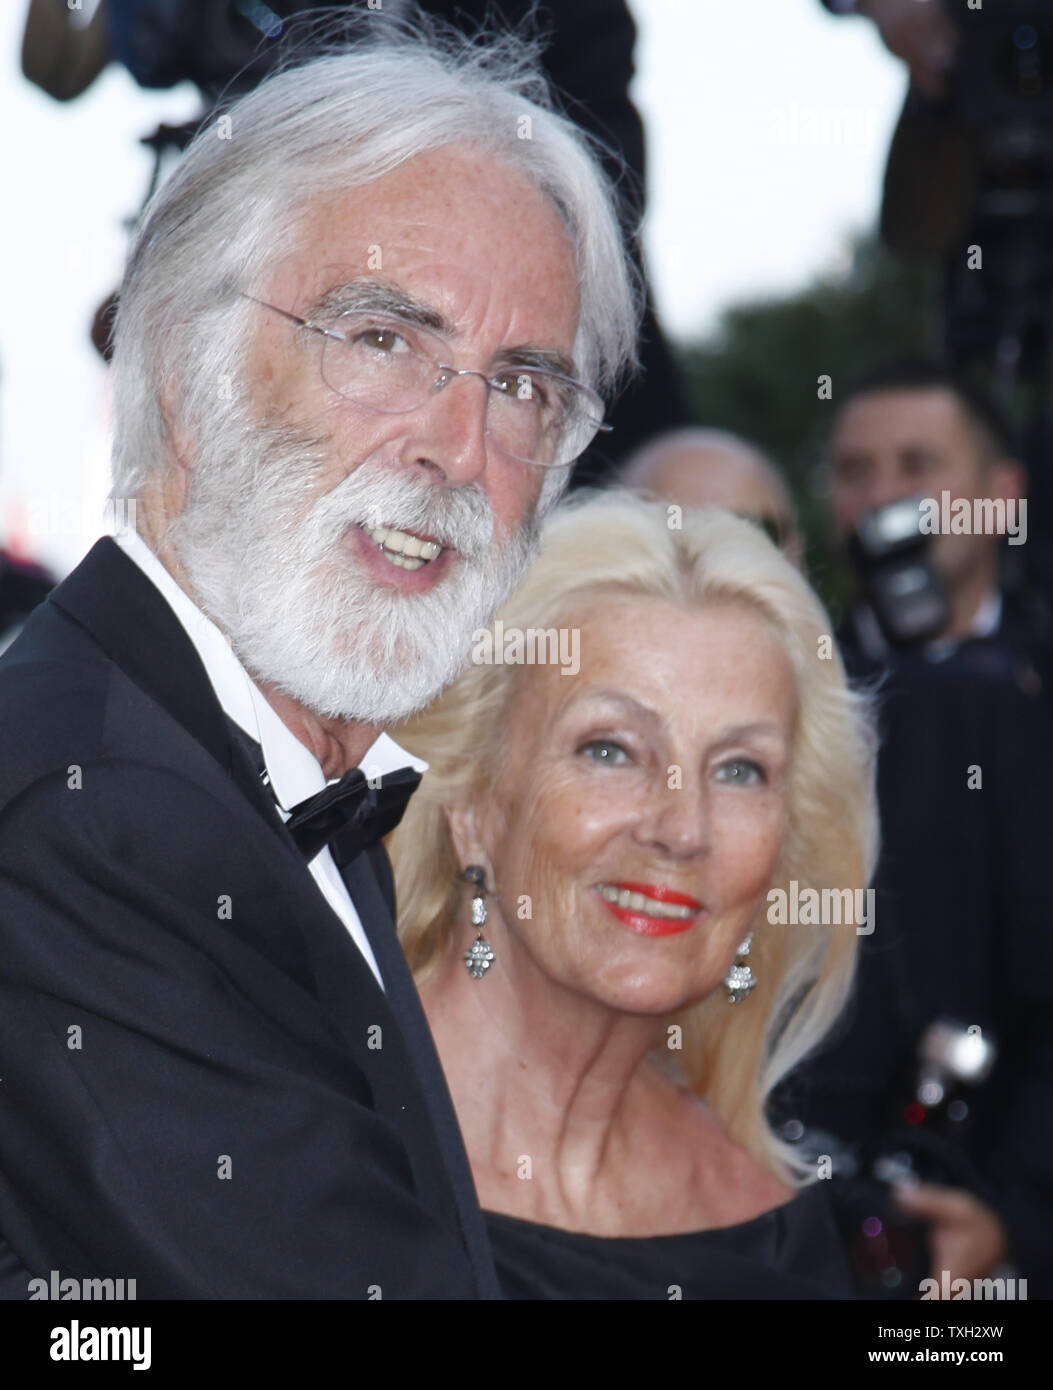 Director Michael Haneke his wife Suzie arrive on the red carpet before the closing ceremony of the 62nd annual Cannes Film Festival in Cannes, France on May 24, 2009.   (UPI Photo/David Silpa) Stock Photo